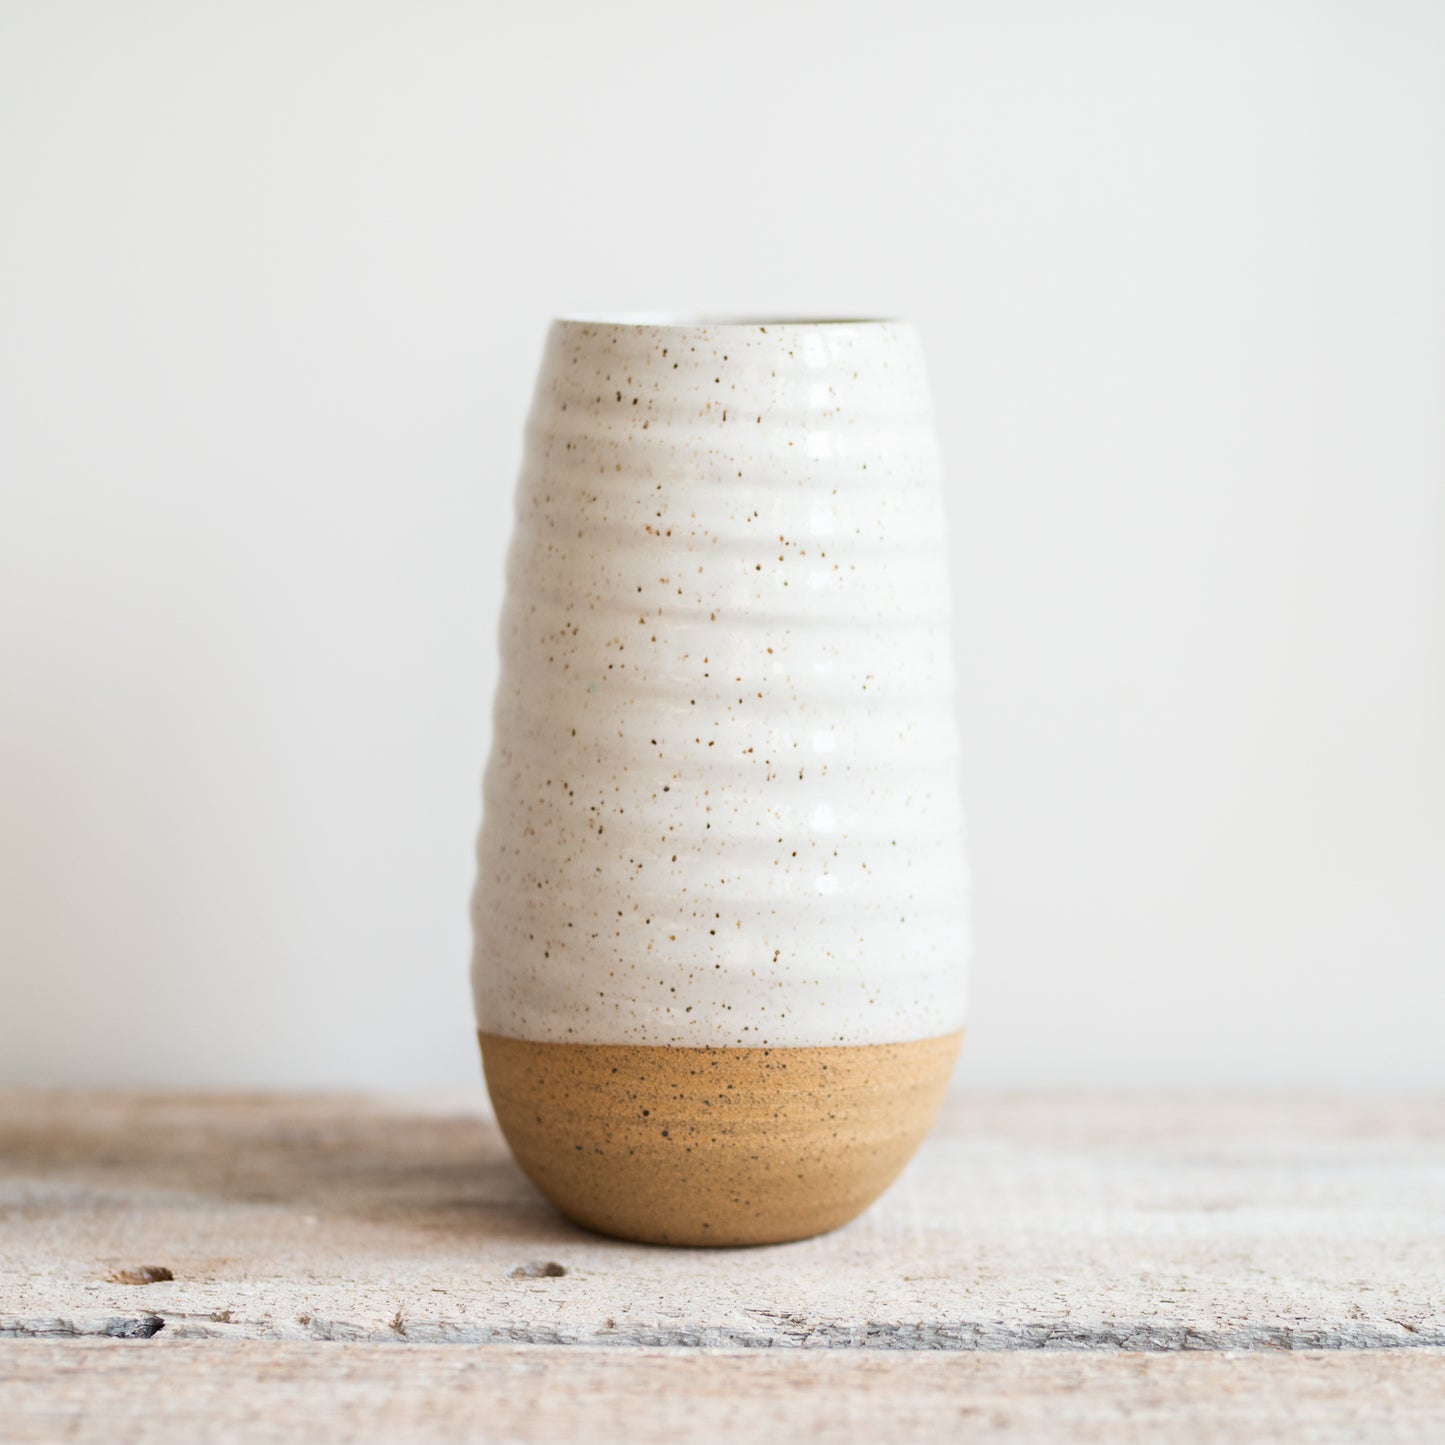 The Ye11ow Studio Tall Vase 9" With Raw Clay Bottom